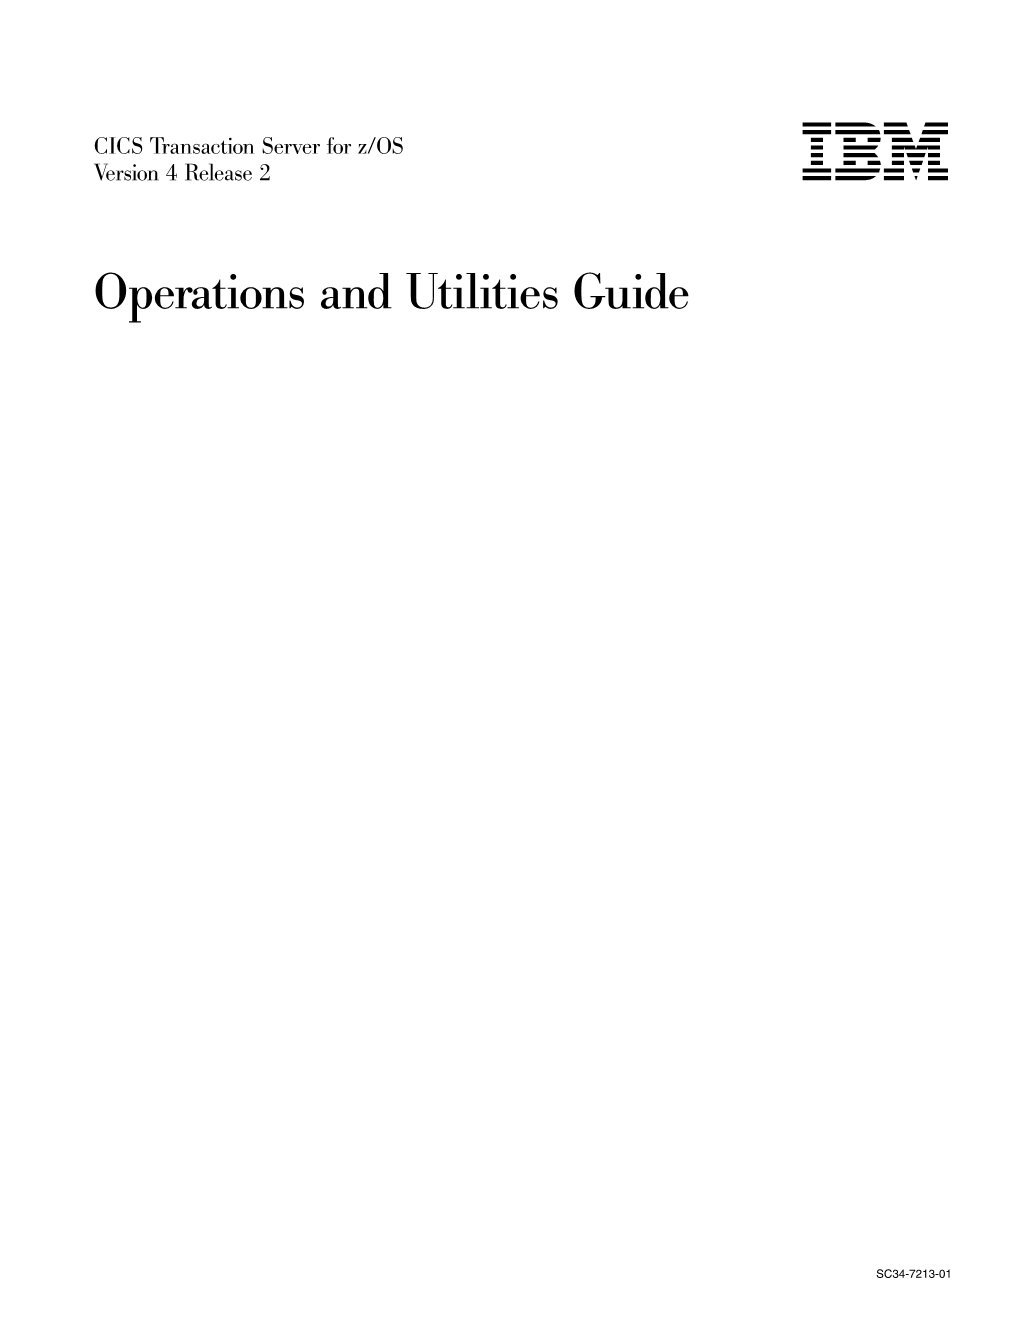 CICS TS for Z/OS 4.2: Operations and Utilities Guide Chapter 15